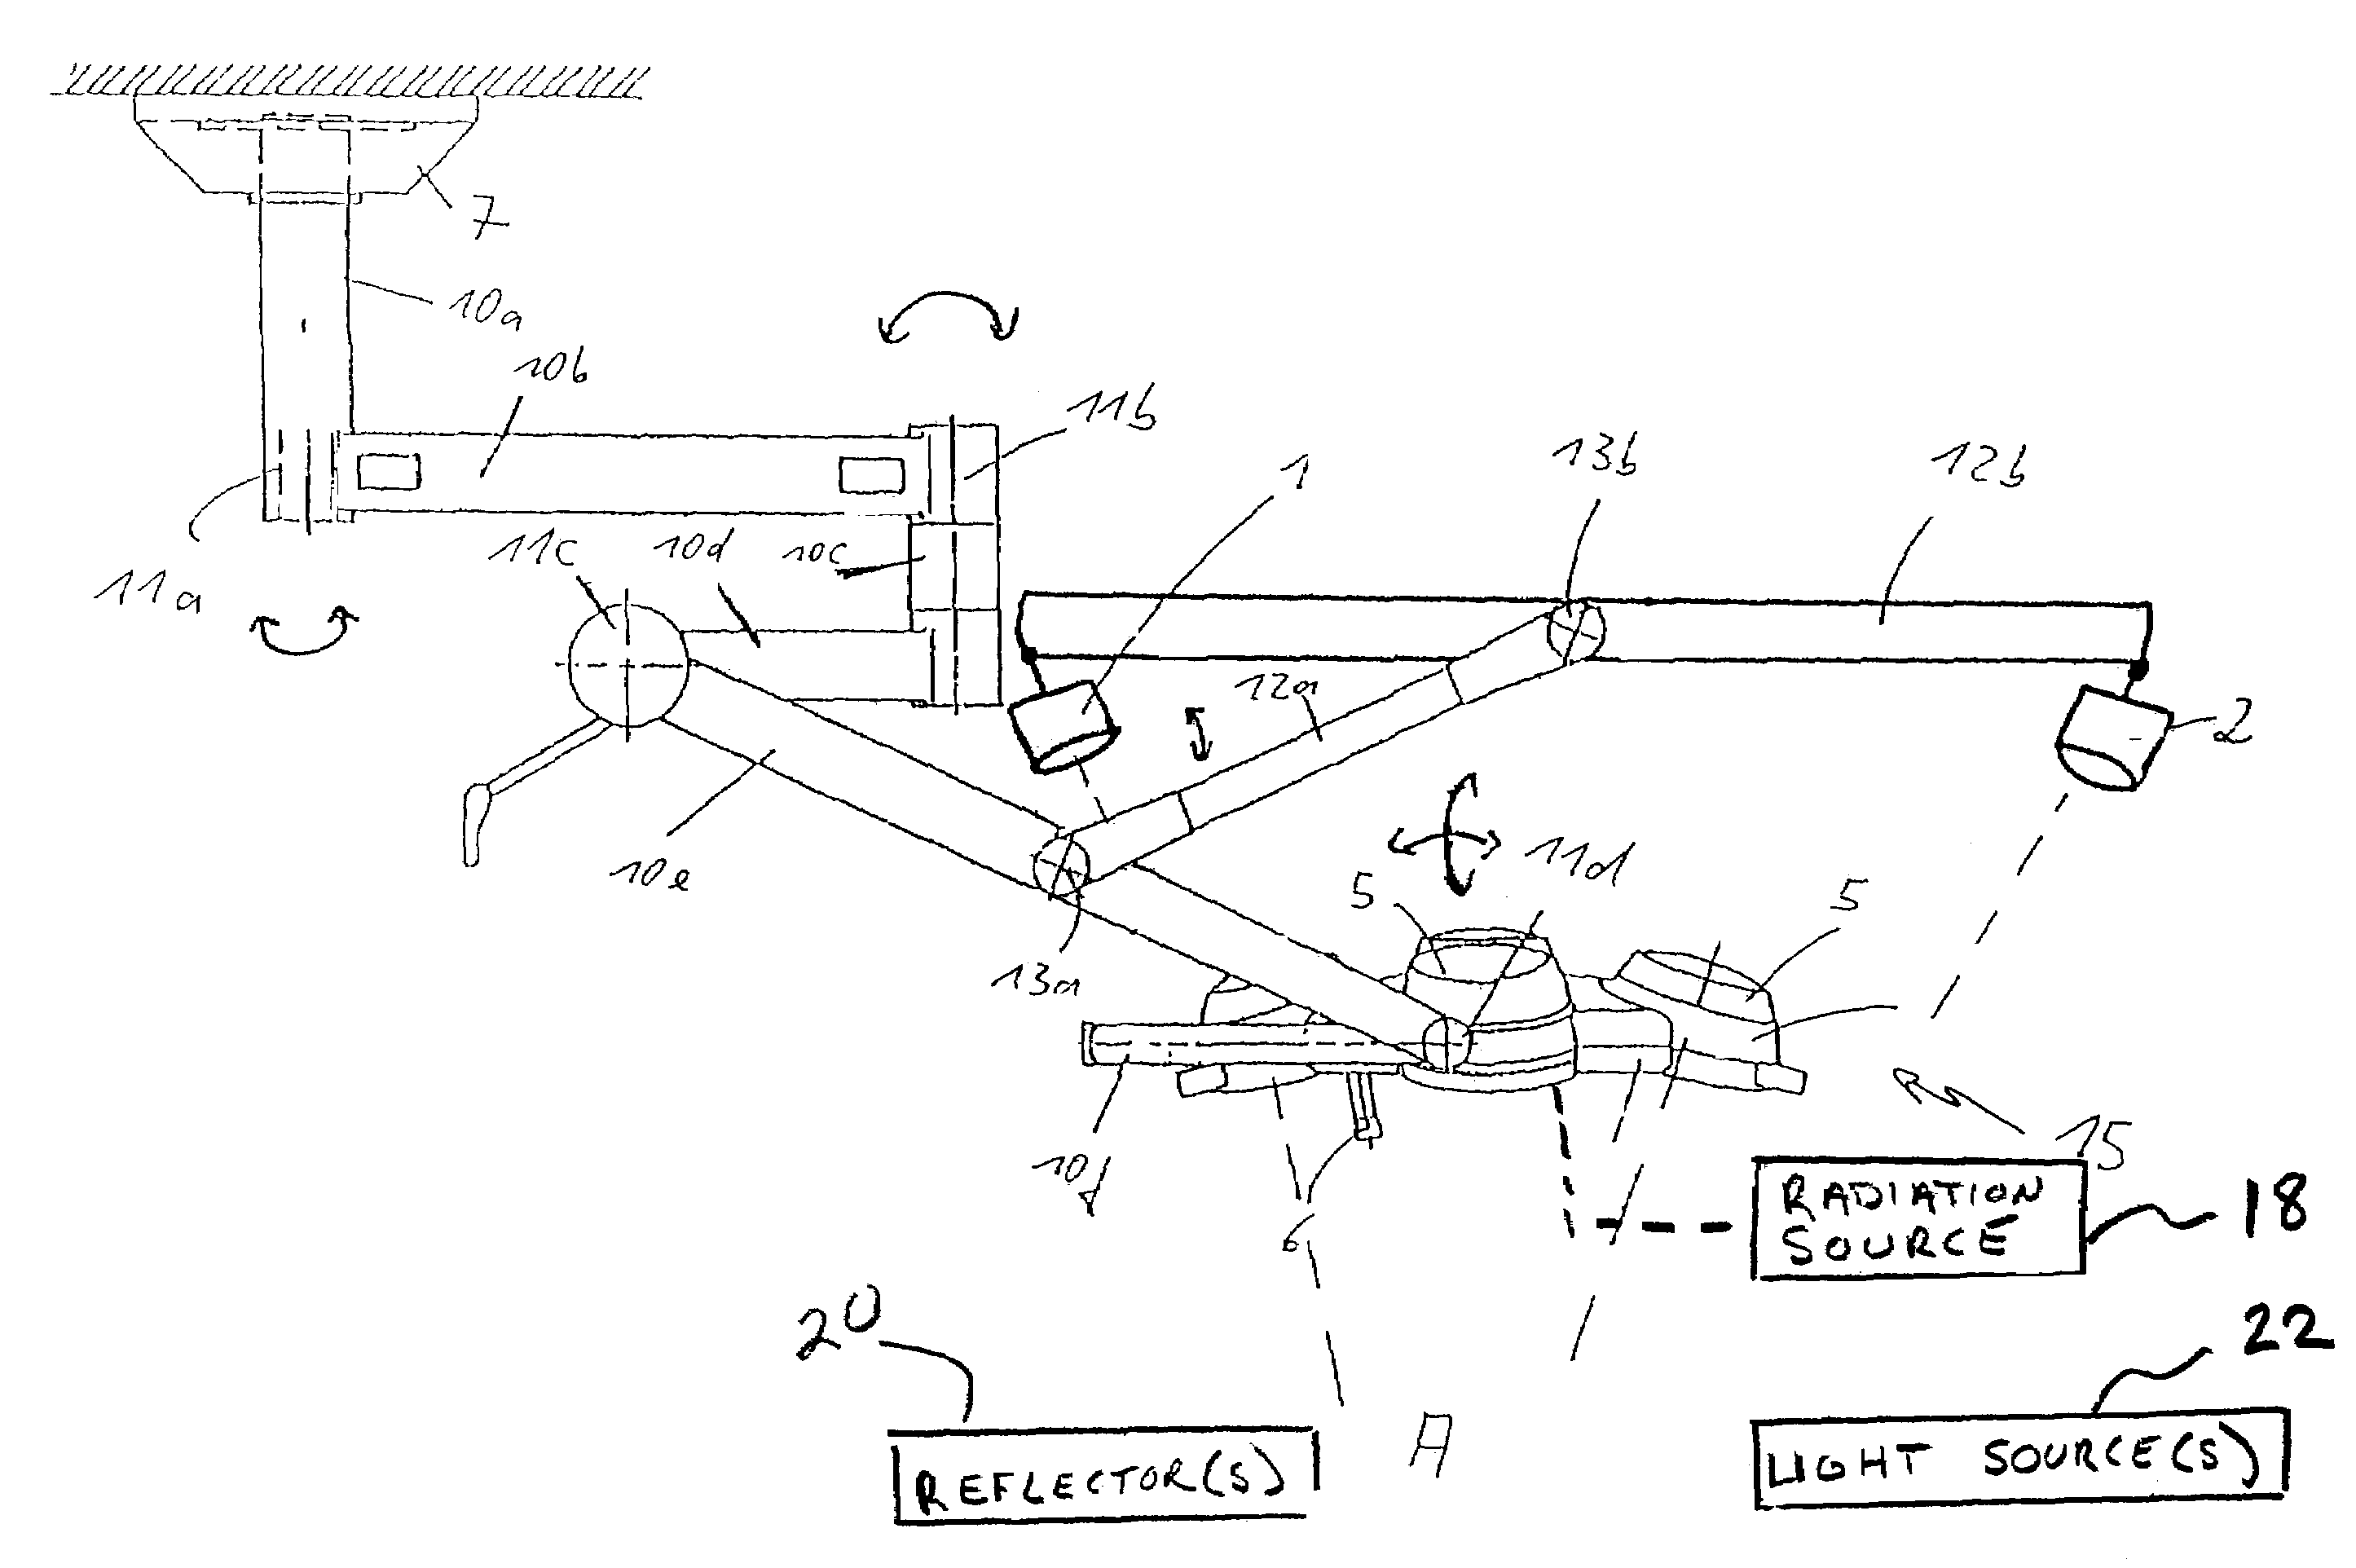 Operation lamp with camera system for 3D referencing